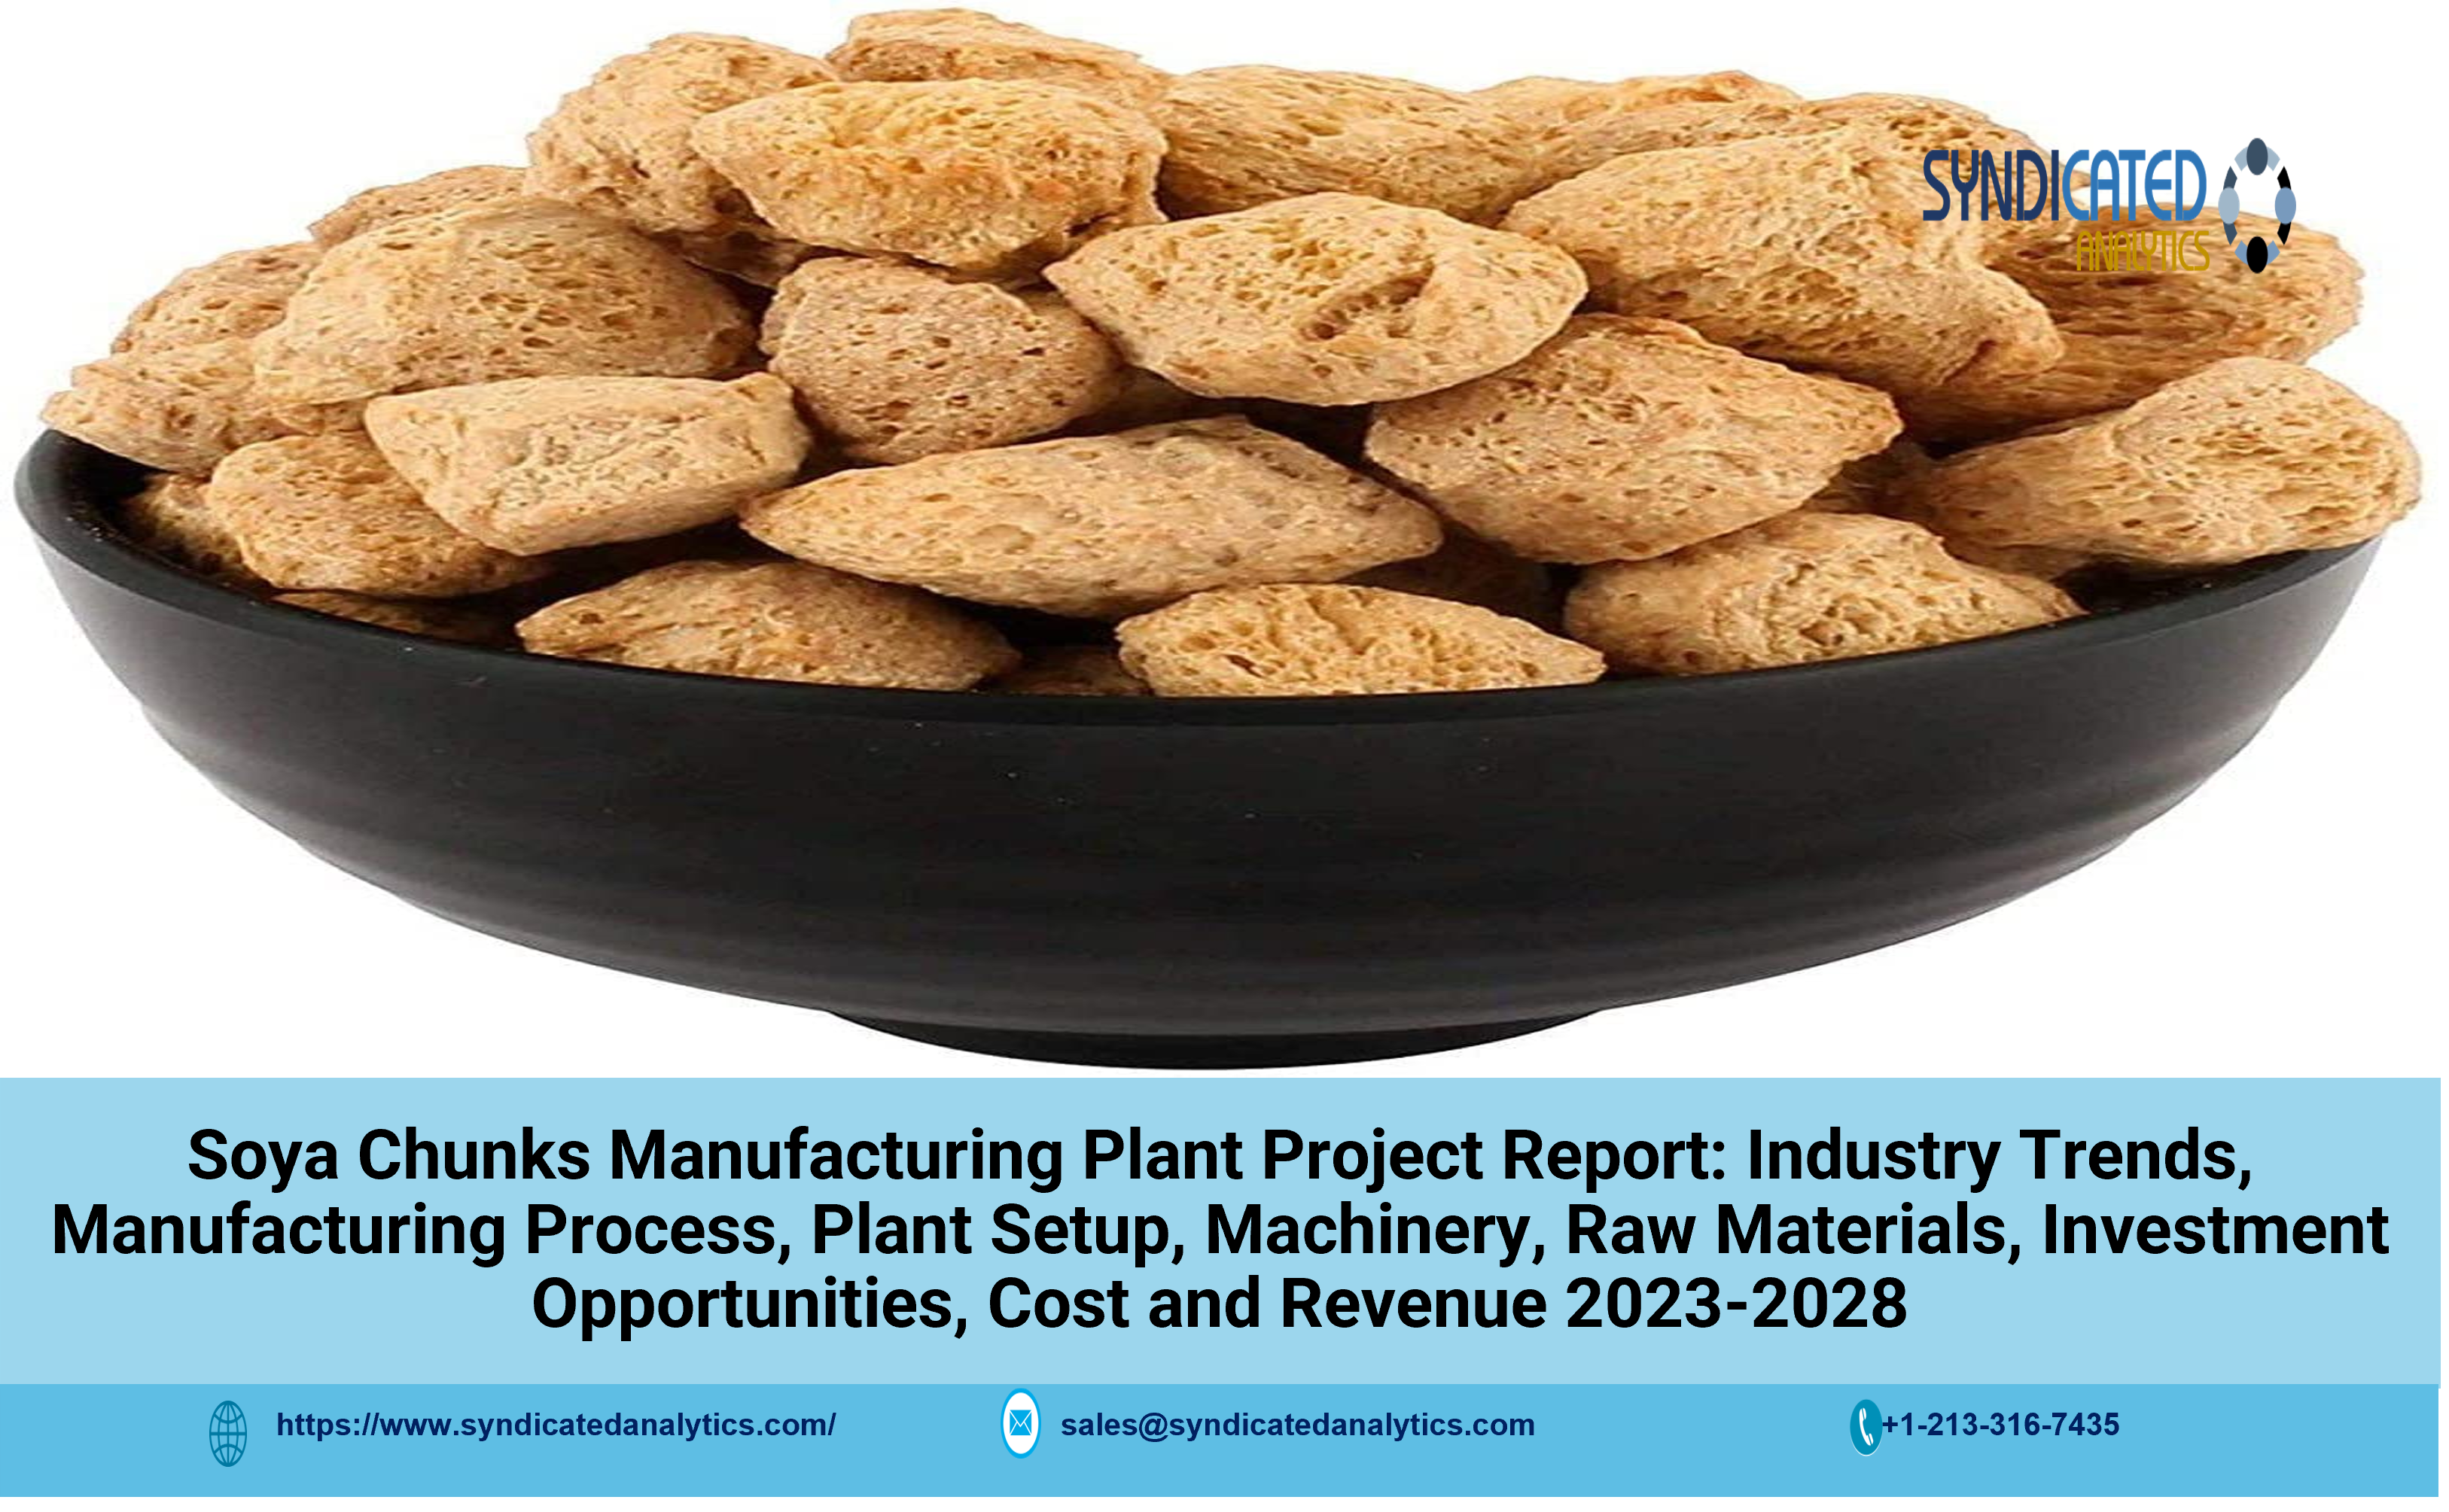 Soya Chunks Manufacturing Project Cost 2023-2028: Plant Setup, Business Plan, Cost and Revenue, Machinery Requirements - Syndicated Analytics